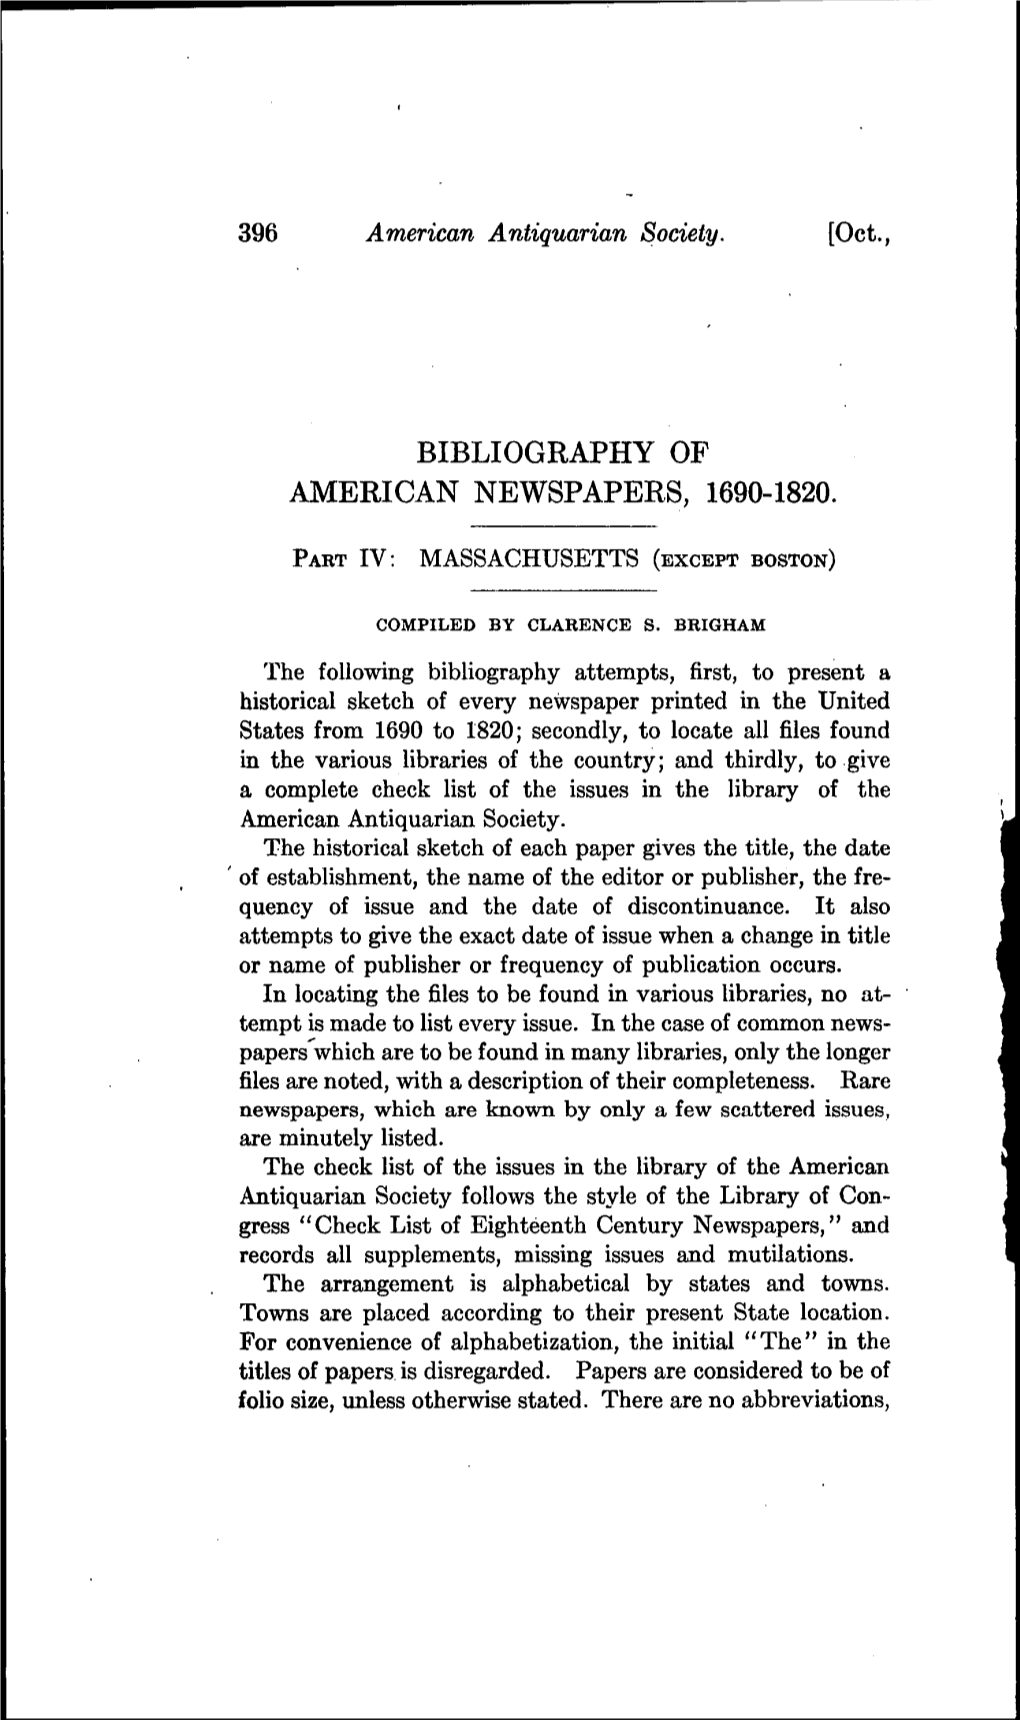 Bibliography of American Newspapers, 1690-1820